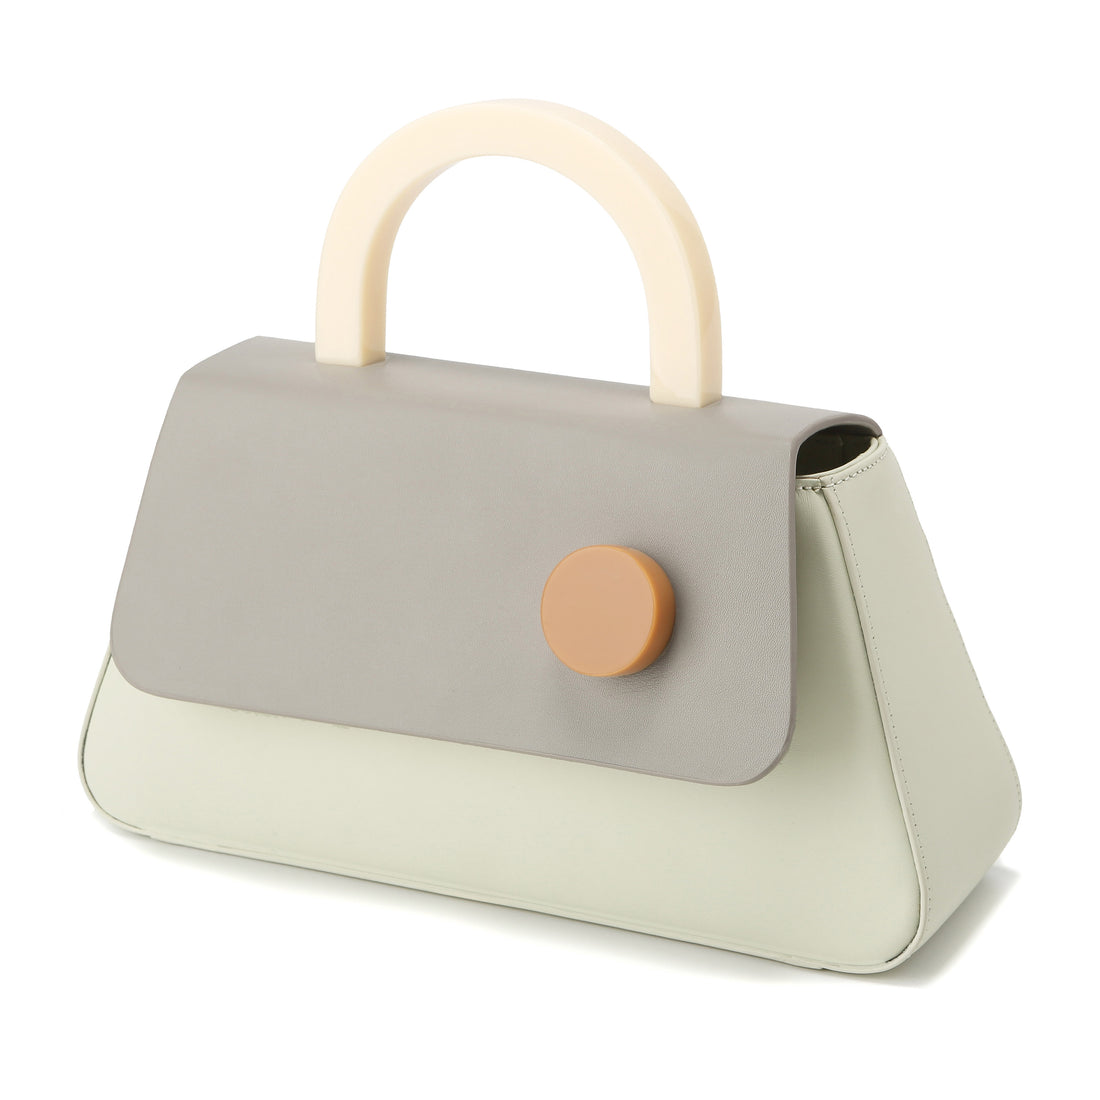 Double Top Handle Structured Bag - White